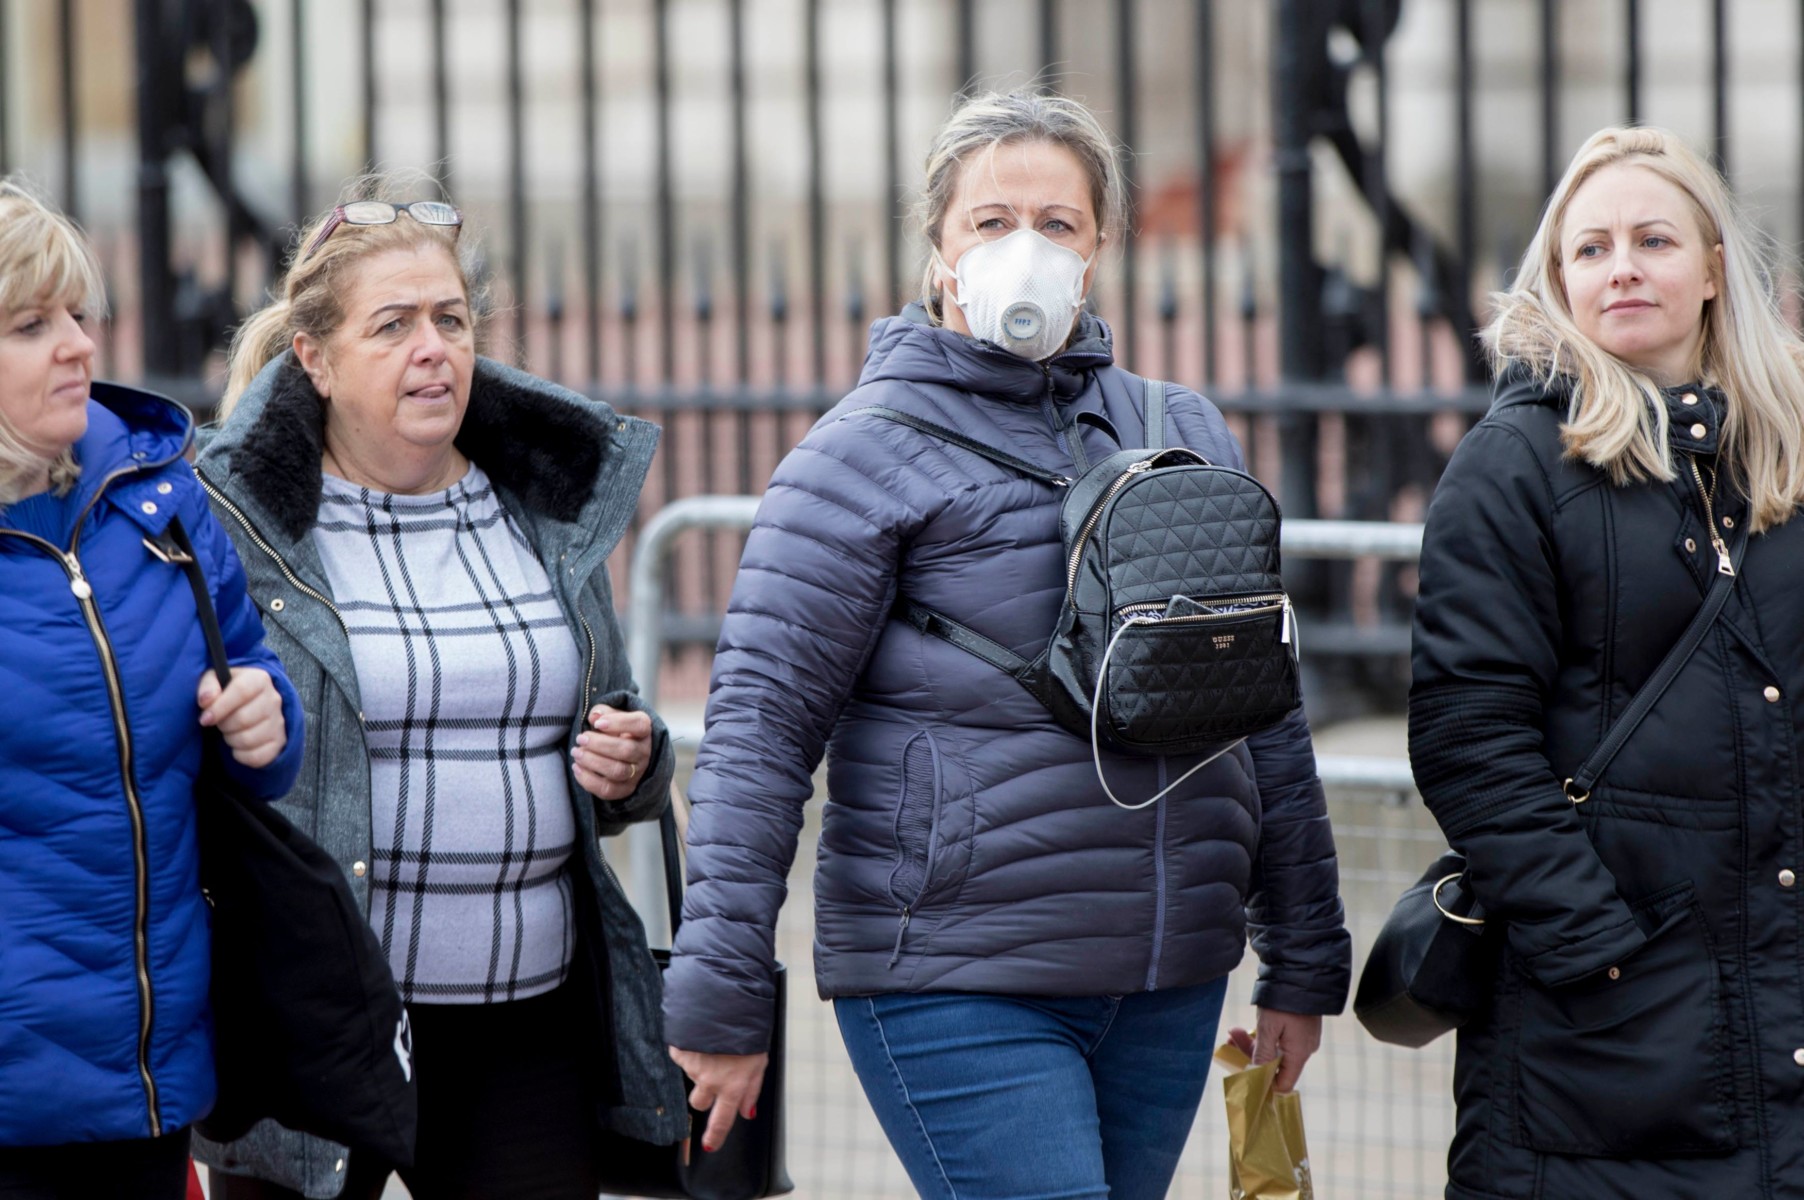 A woman wearing a protective face mask walks past Buckingham Palace, London, as Health Secretary Matt Hancock has said ministers are yet to make a decision on whether to ban gatherings